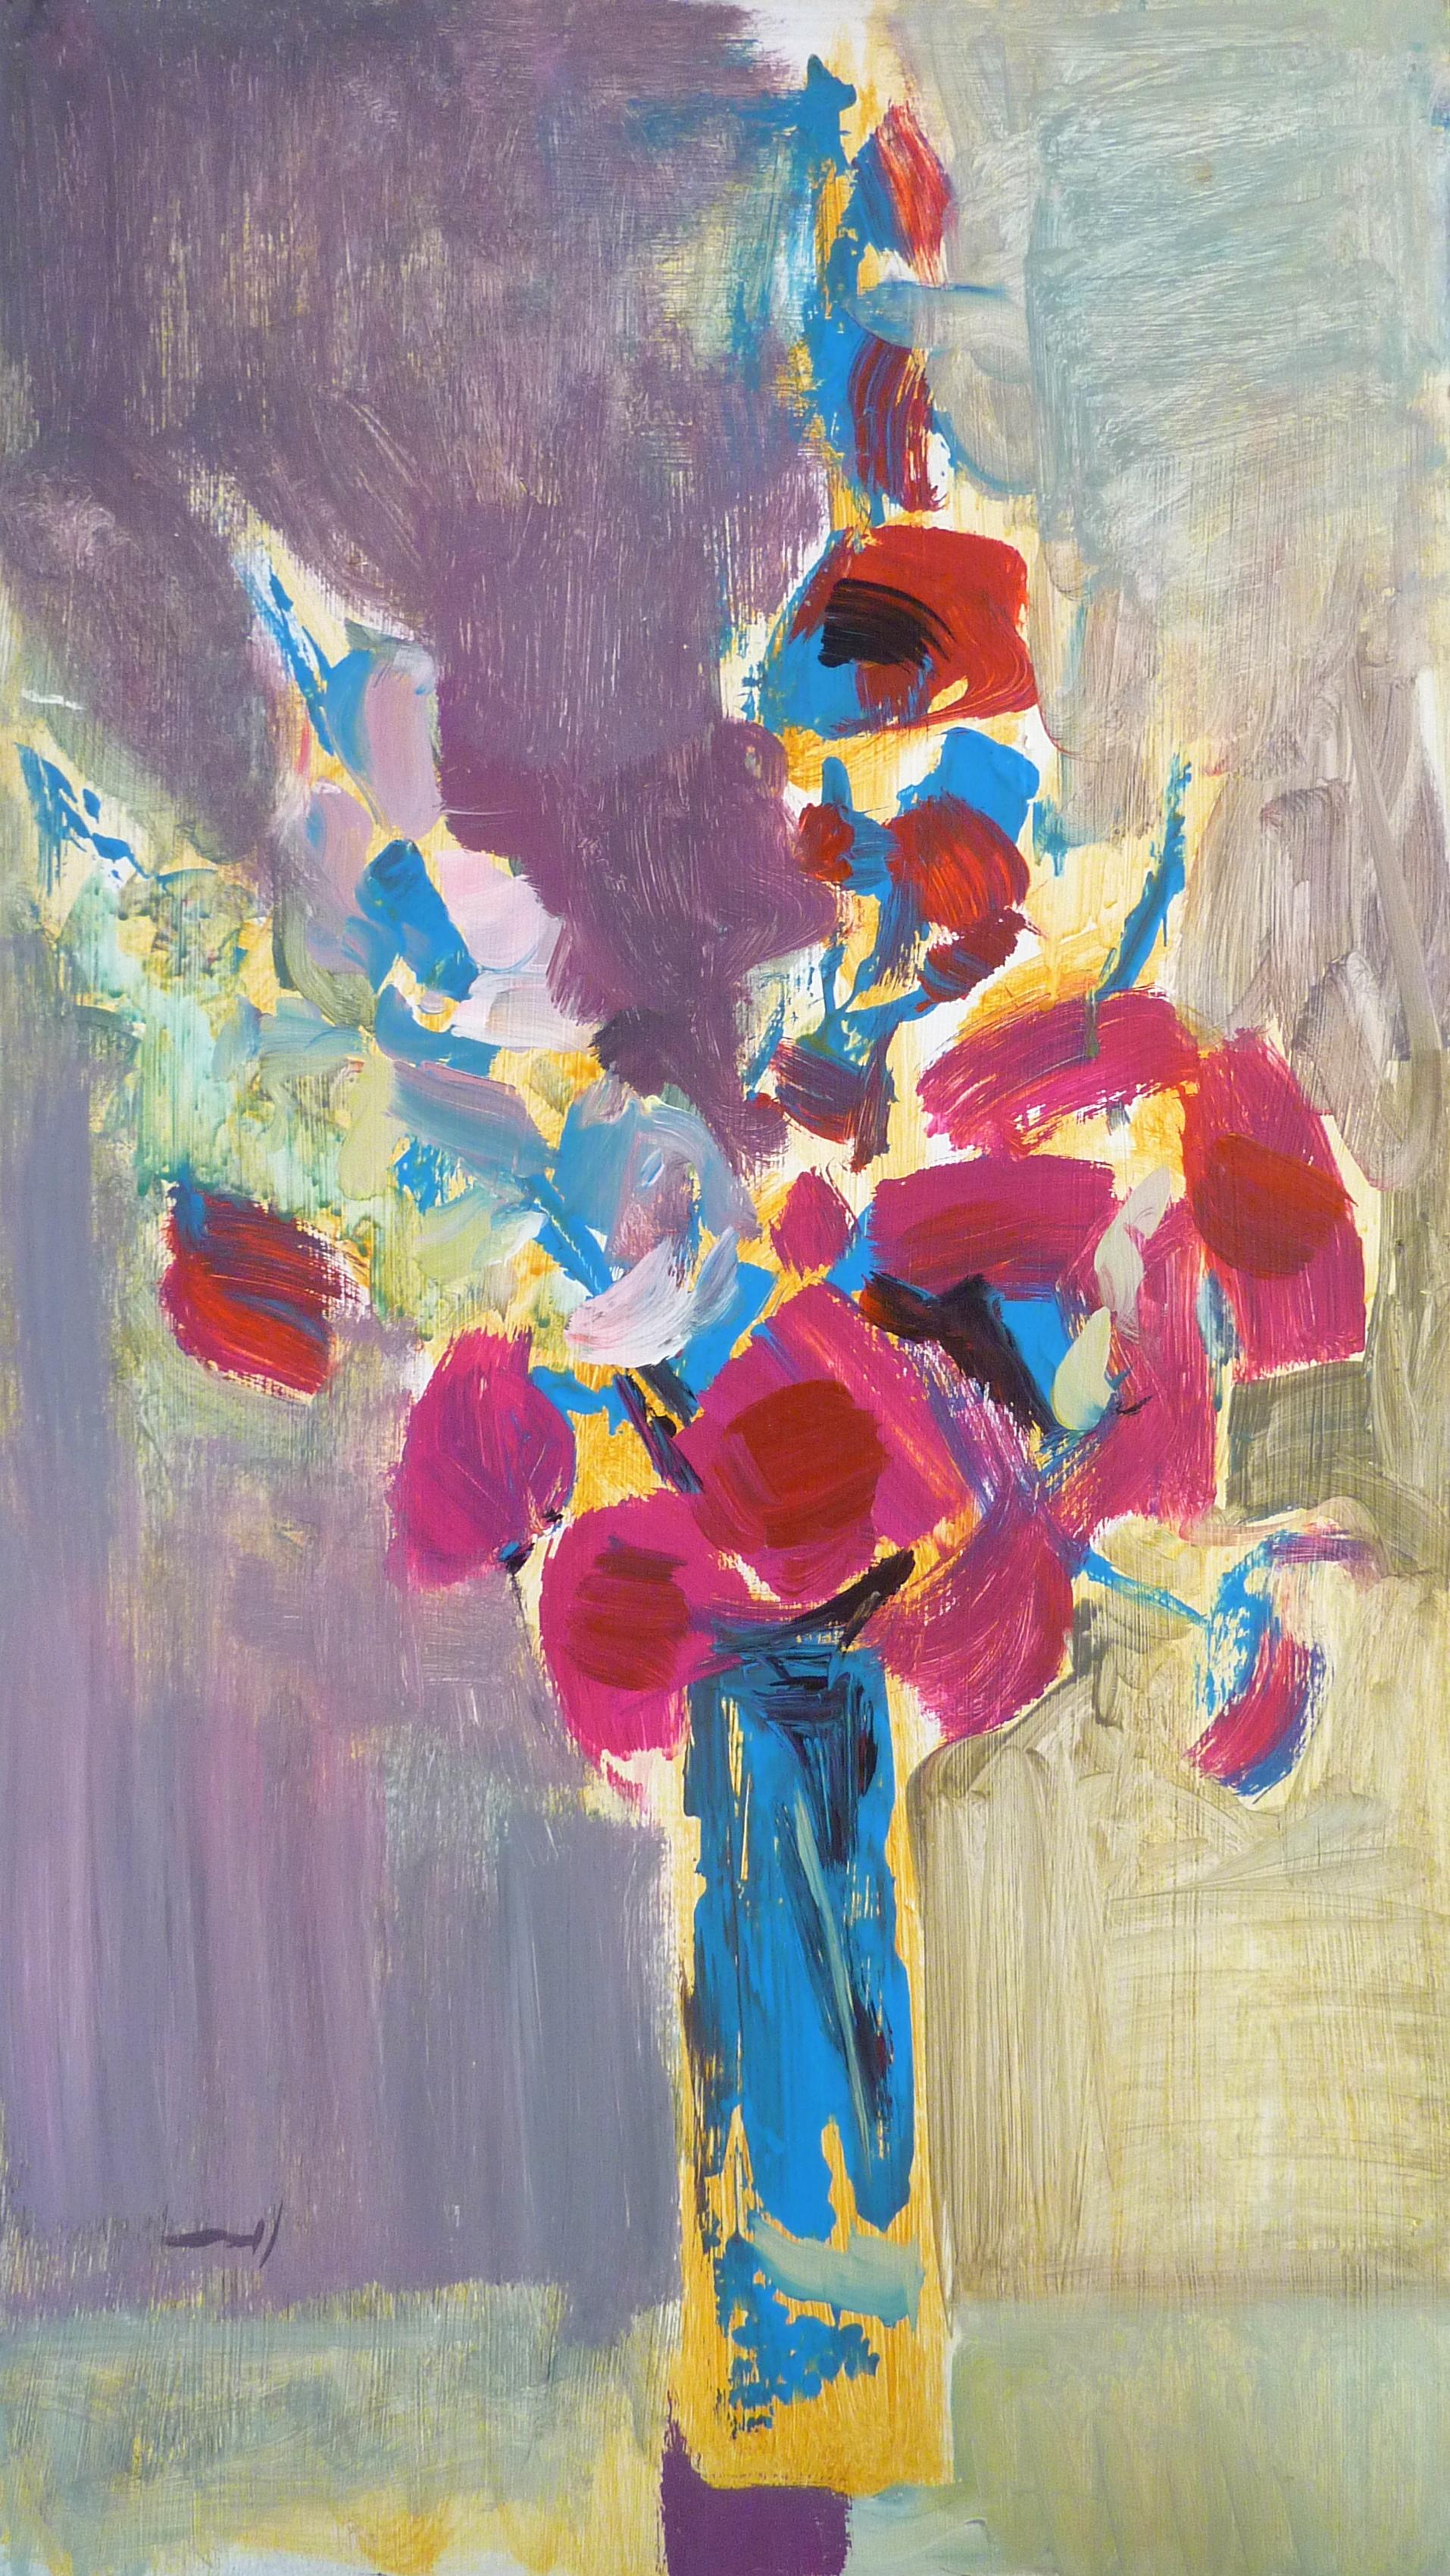 Purple Vase With Flowers - 21st Century Contemporary Fauvist Oil Painting